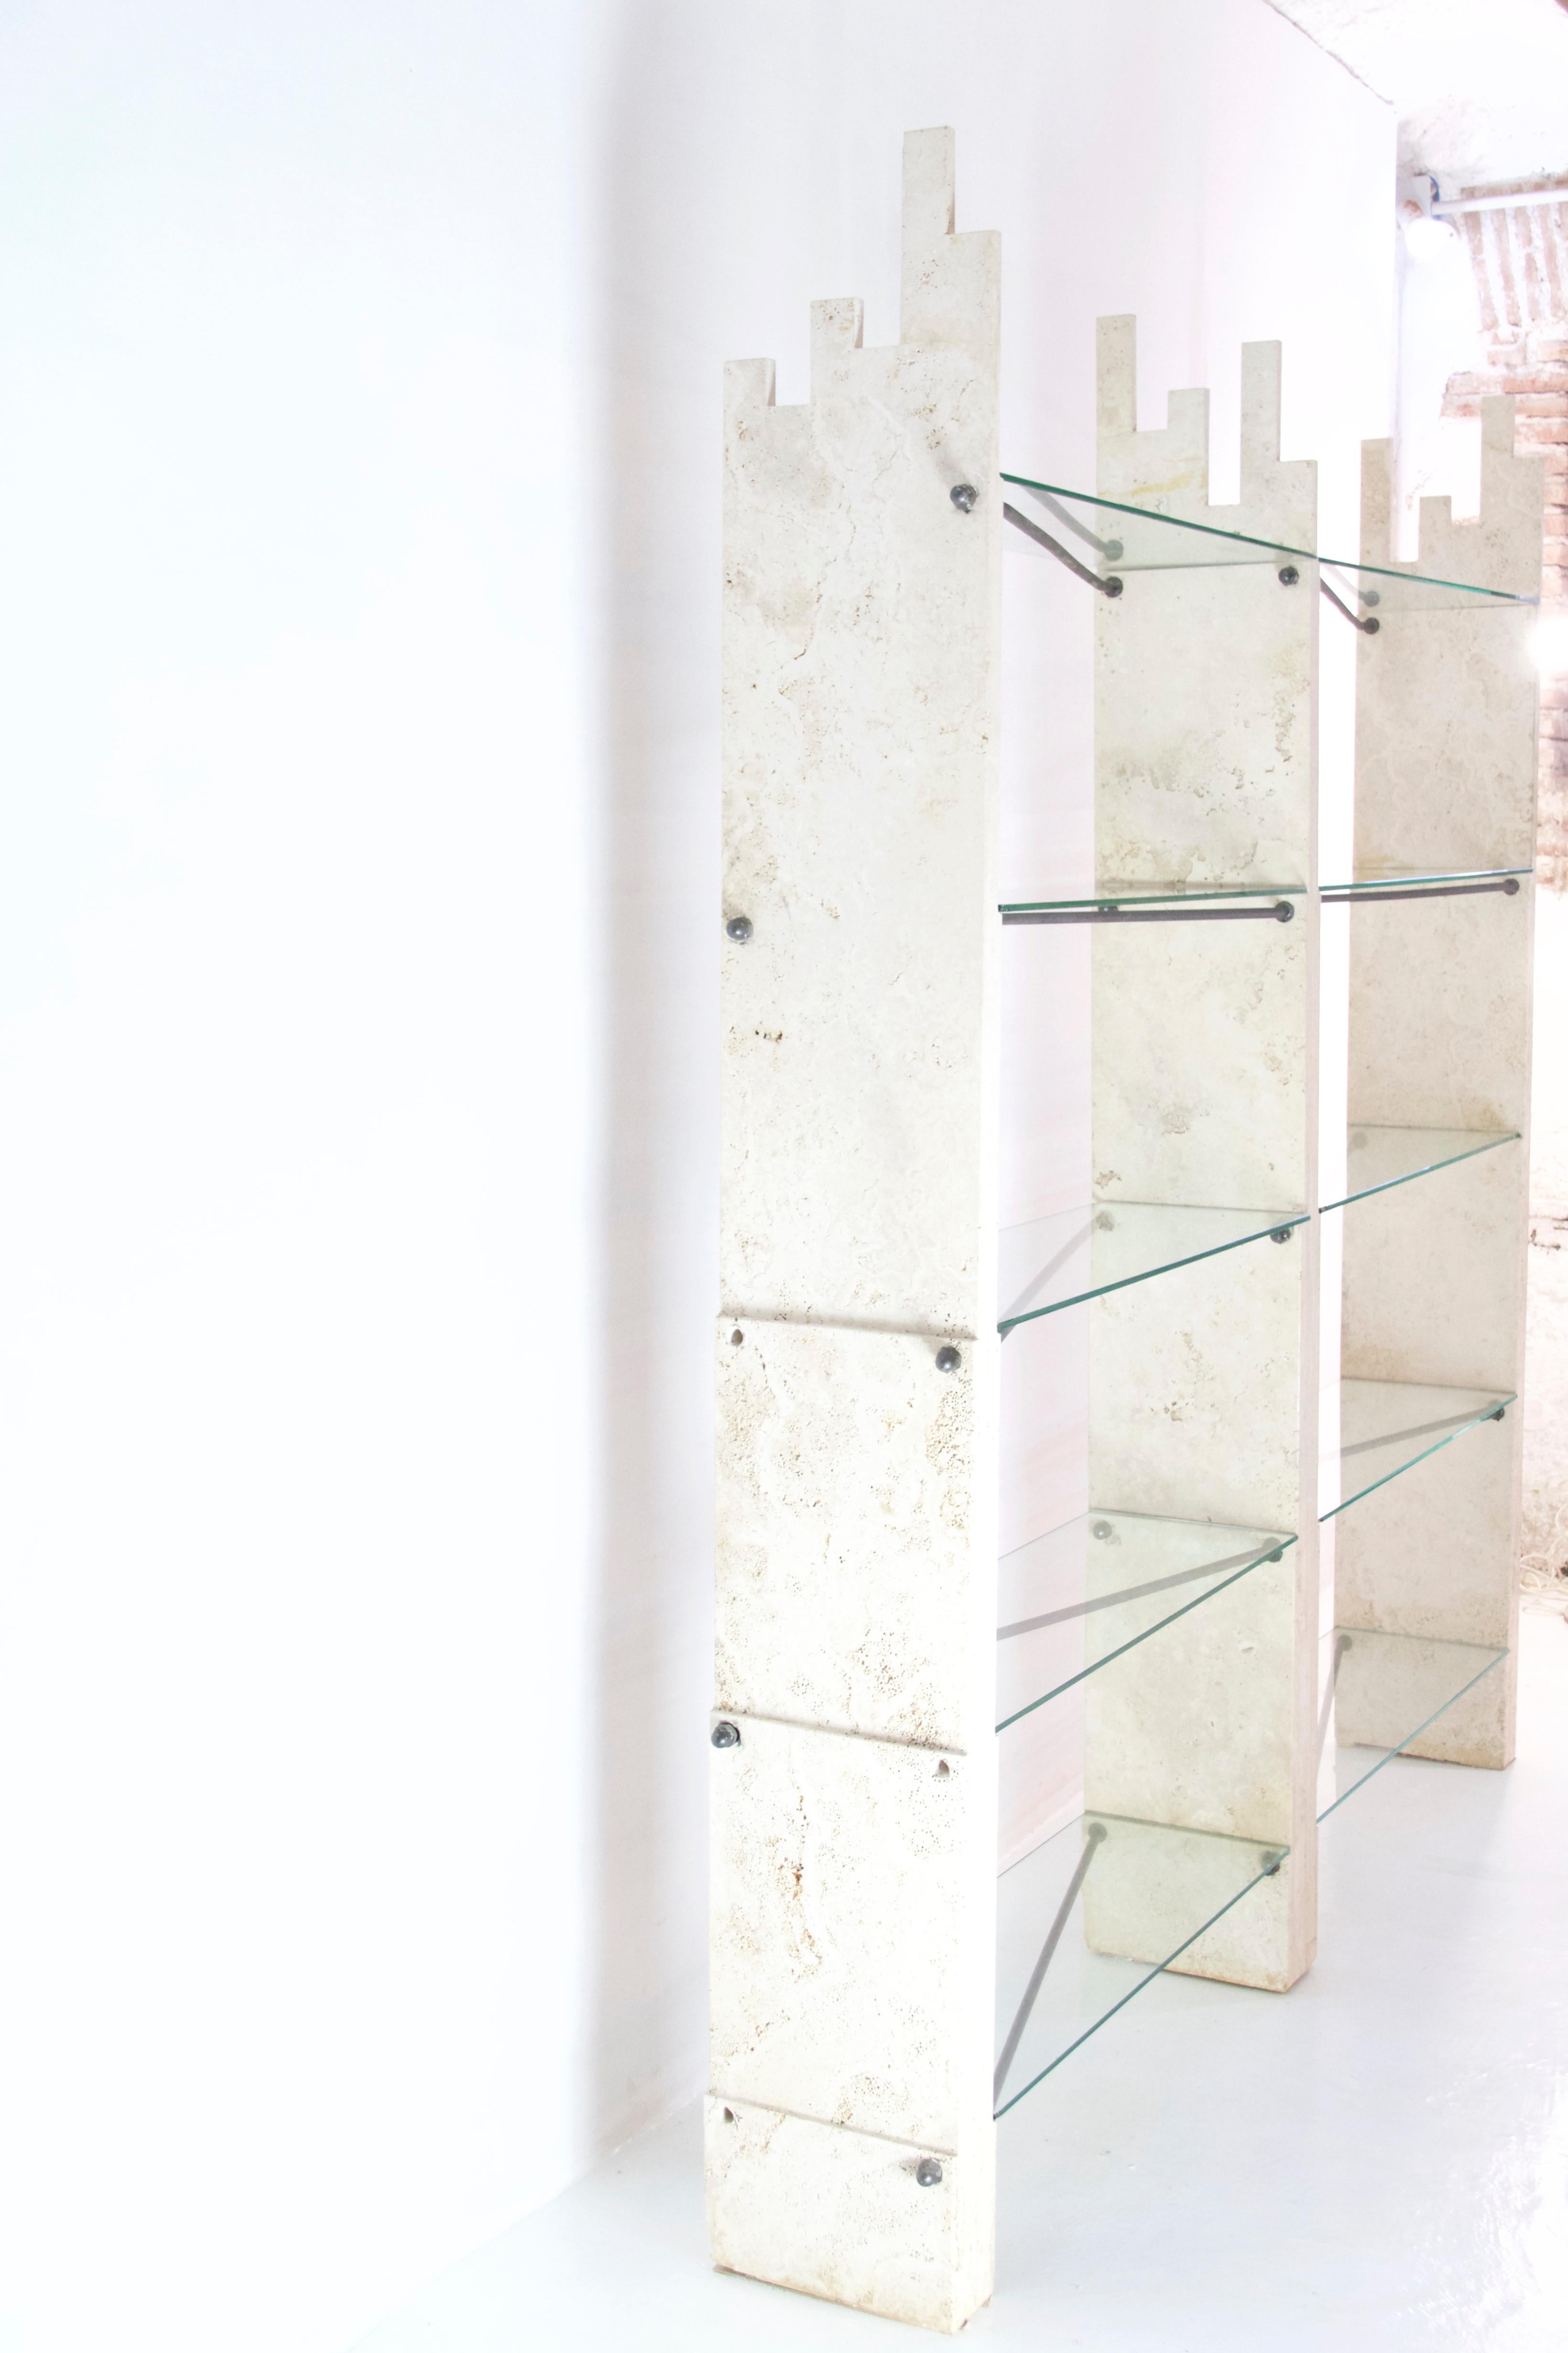 Simply a unique wall unit which has distinct elements of travertine supporting the floating glass shelves. The traverine is supported by steel beams making the constructions sturdy and stable. This bookcase can be modified to either have one large